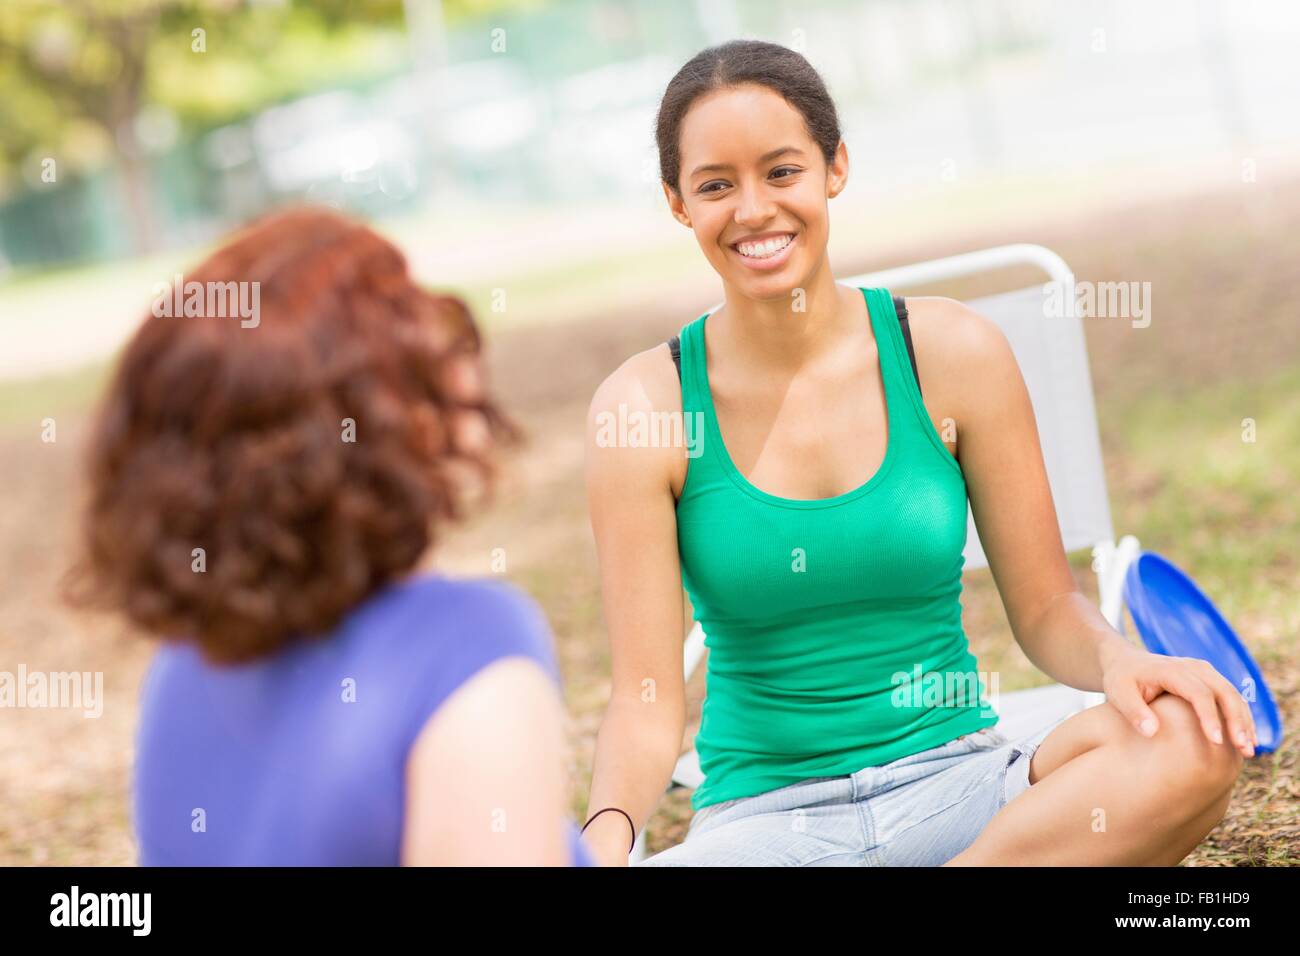 Young woman sitting crossed legs talking to friend, smiling Stock Photo